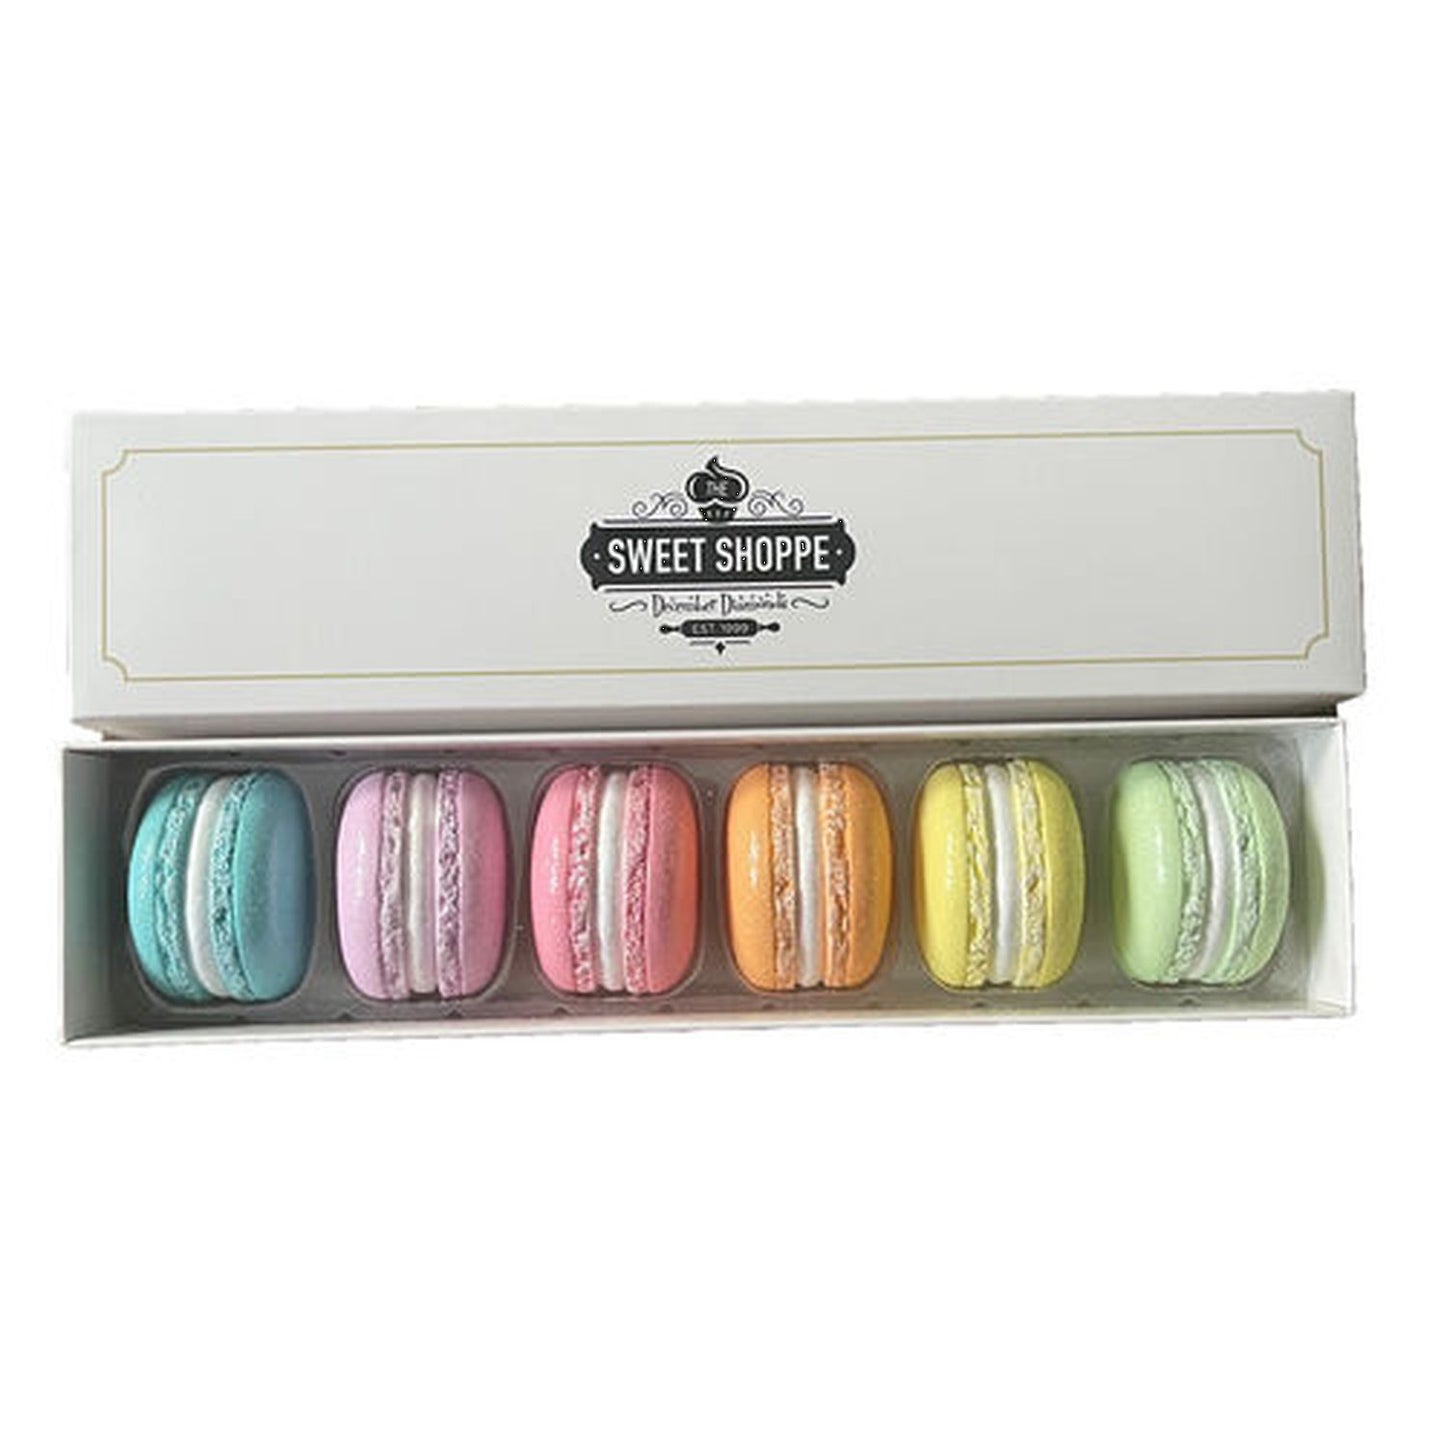 December Diamonds Cotton Candy - 6 Assortments Gift Boxed Macaroon Ornament